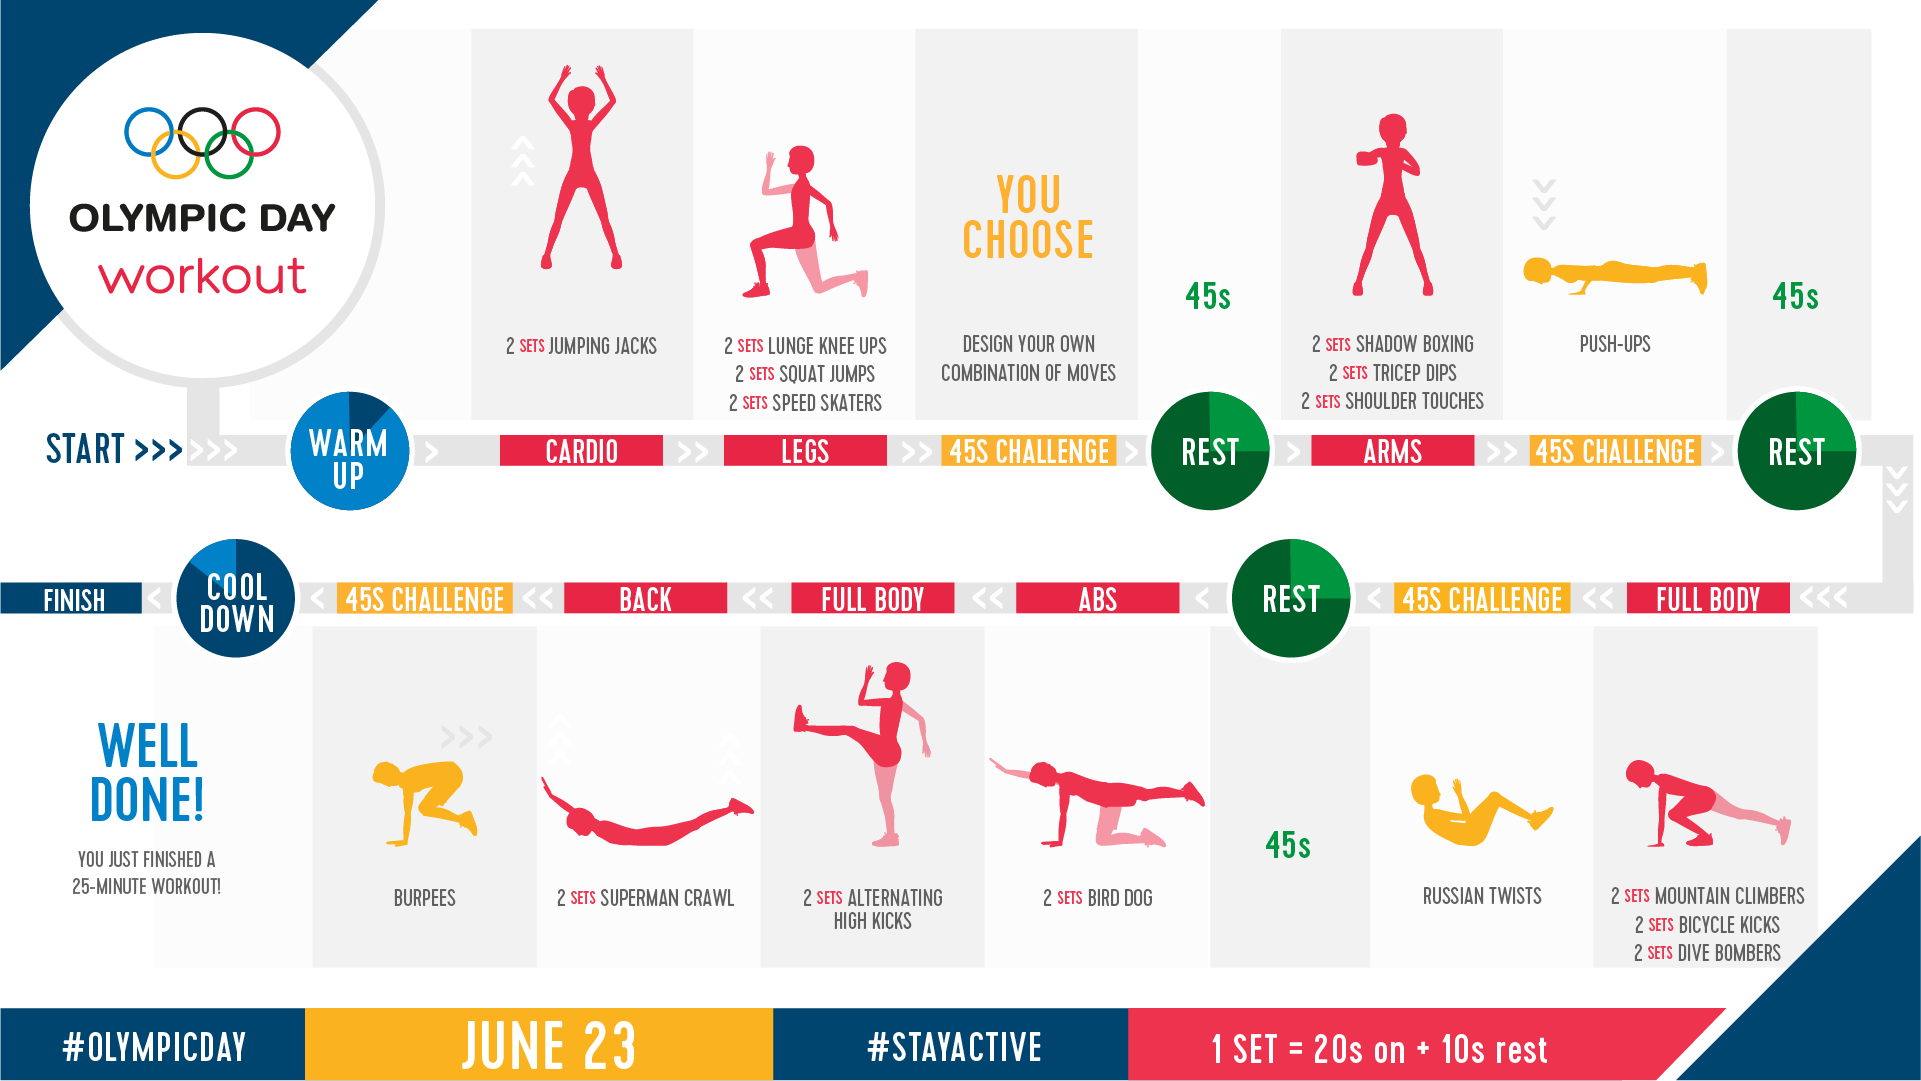 OLYMPIC DAY JOIN THE WORLDS LARGEST 24-HOUR DIGITAL WORKOUT